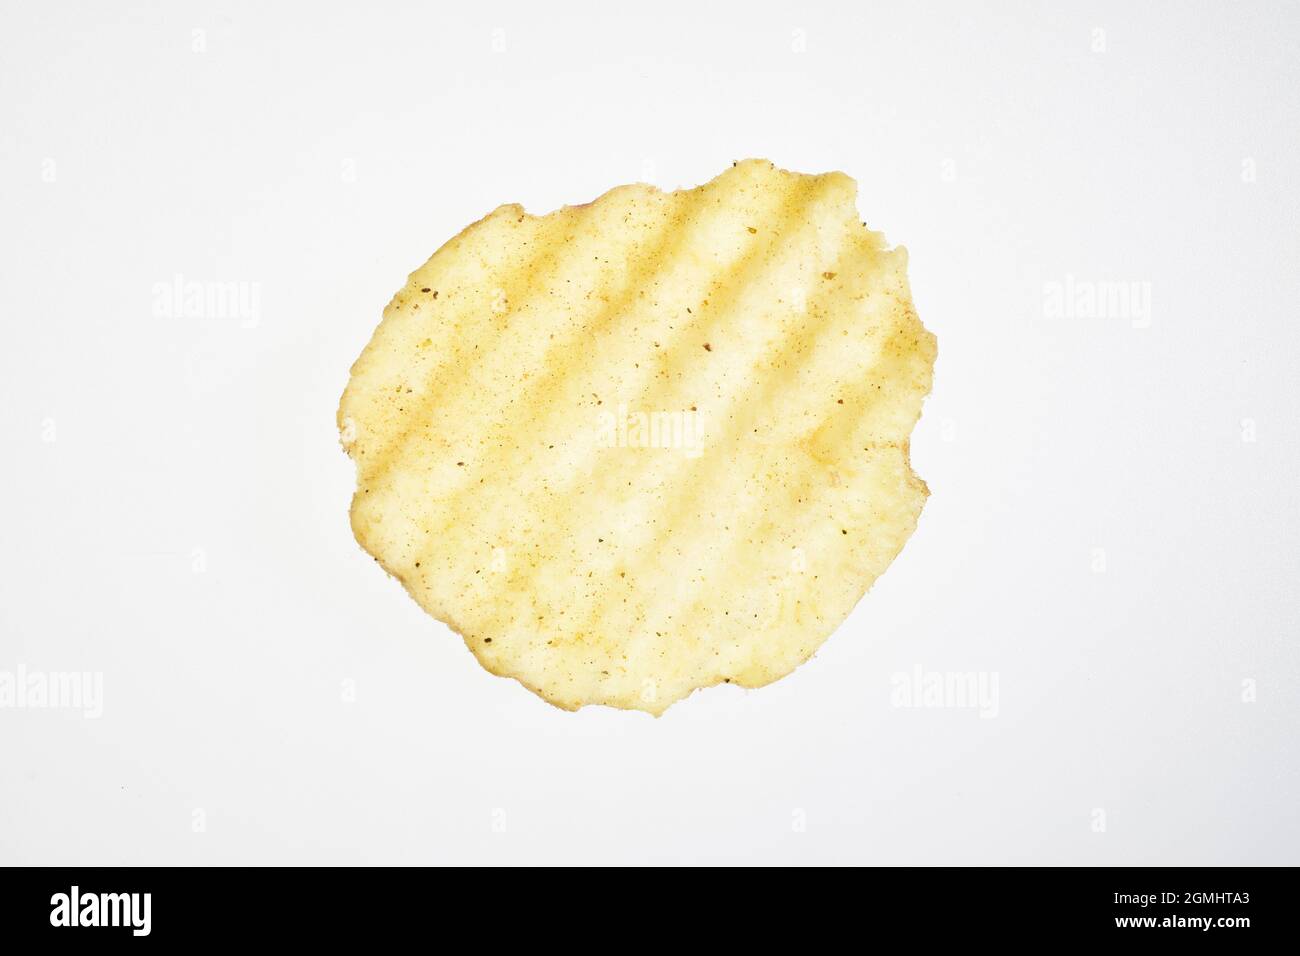 https://c8.alamy.com/comp/2GMHTA3/top-view-of-single-potato-chip-isolated-on-white-background-with-clipping-path-2GMHTA3.jpg